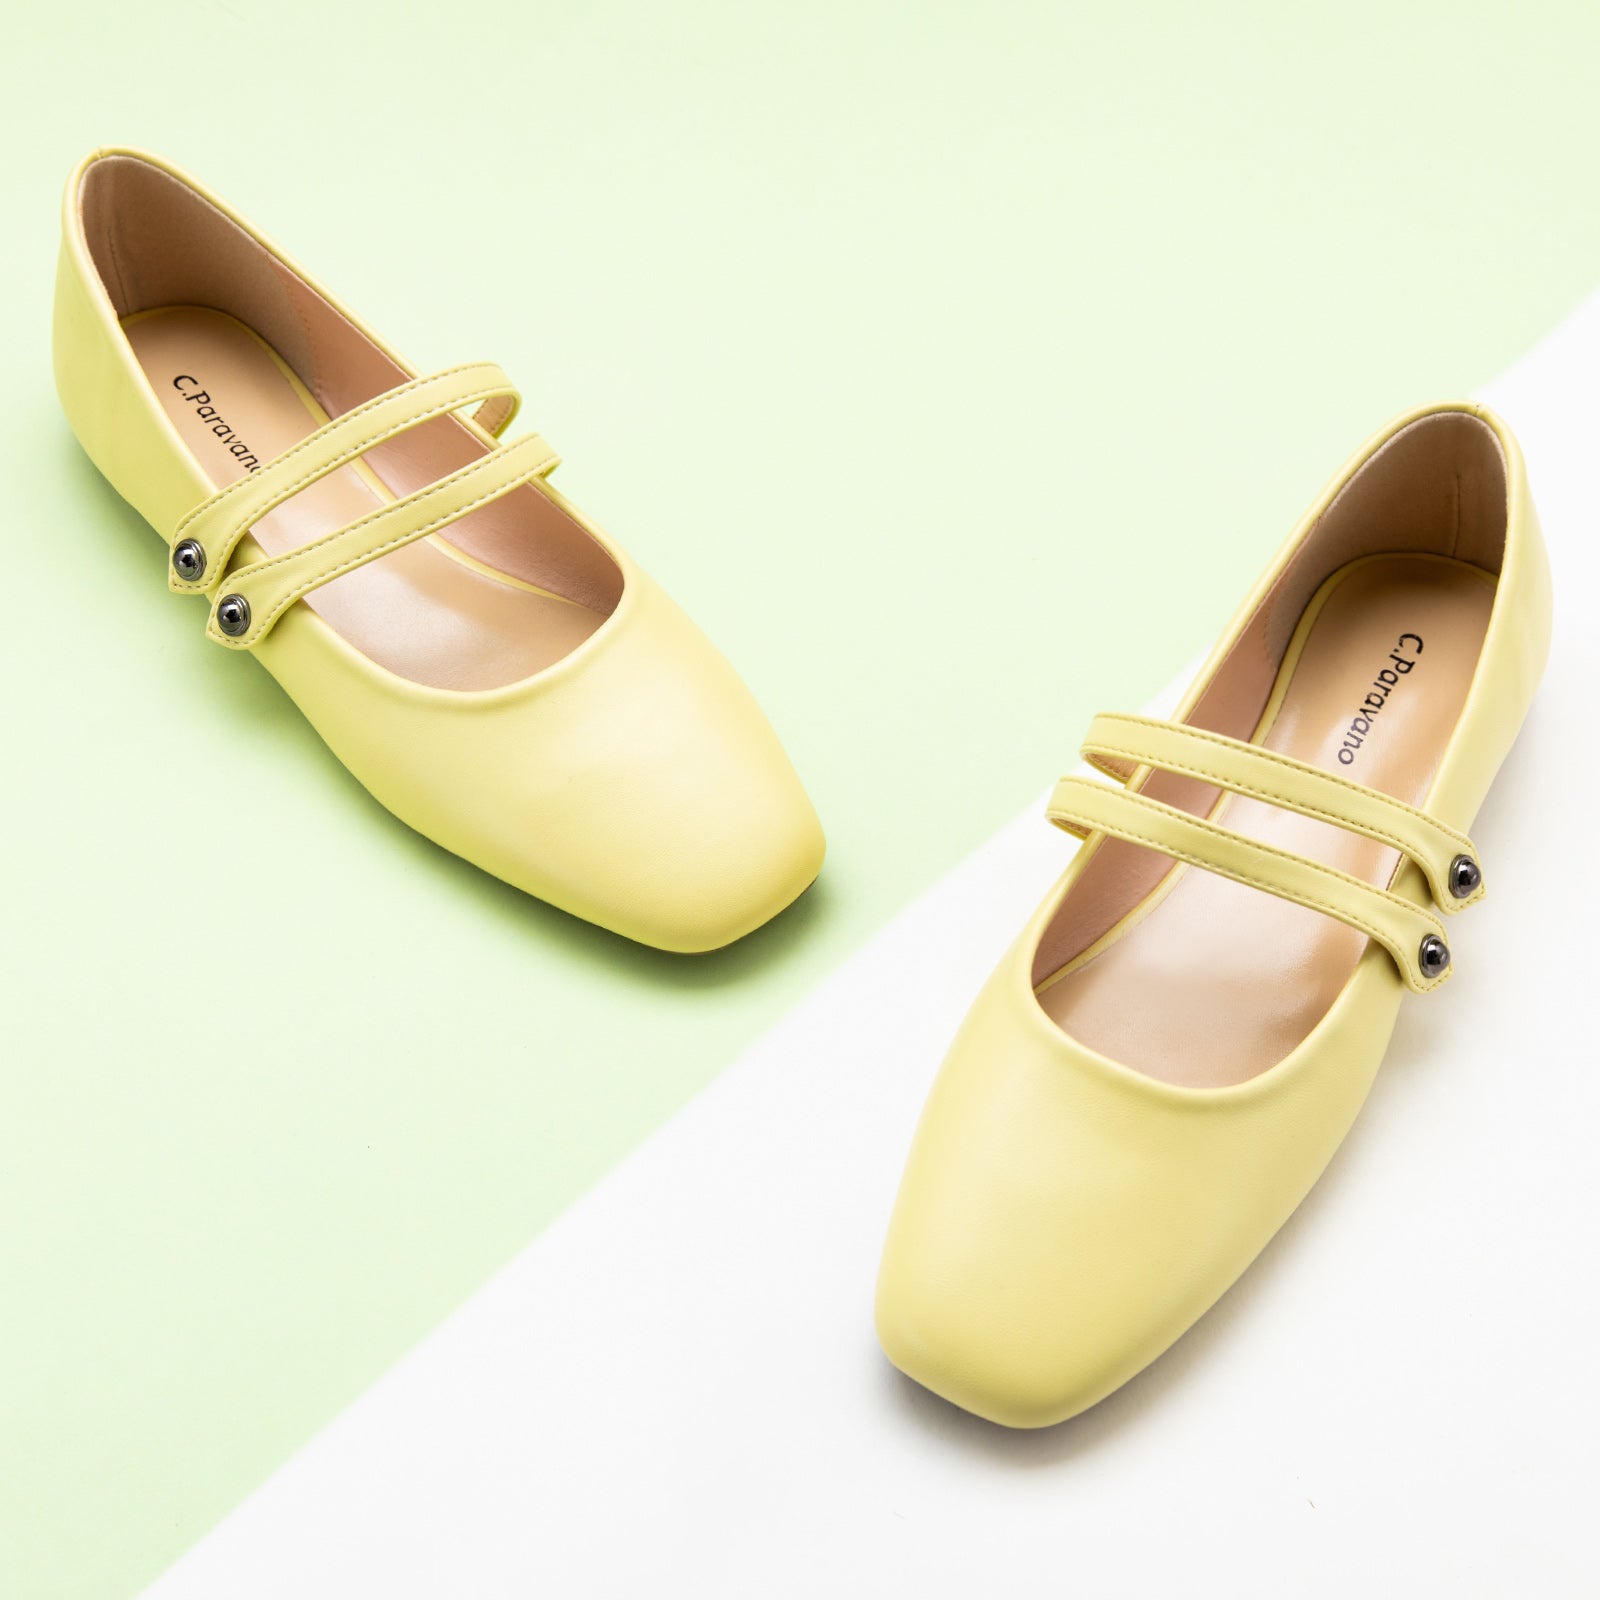 Sunny Delight: Yellow Double Stripes Mary Jane shoes, a cheerful and vibrant choice for a playful and stylish look